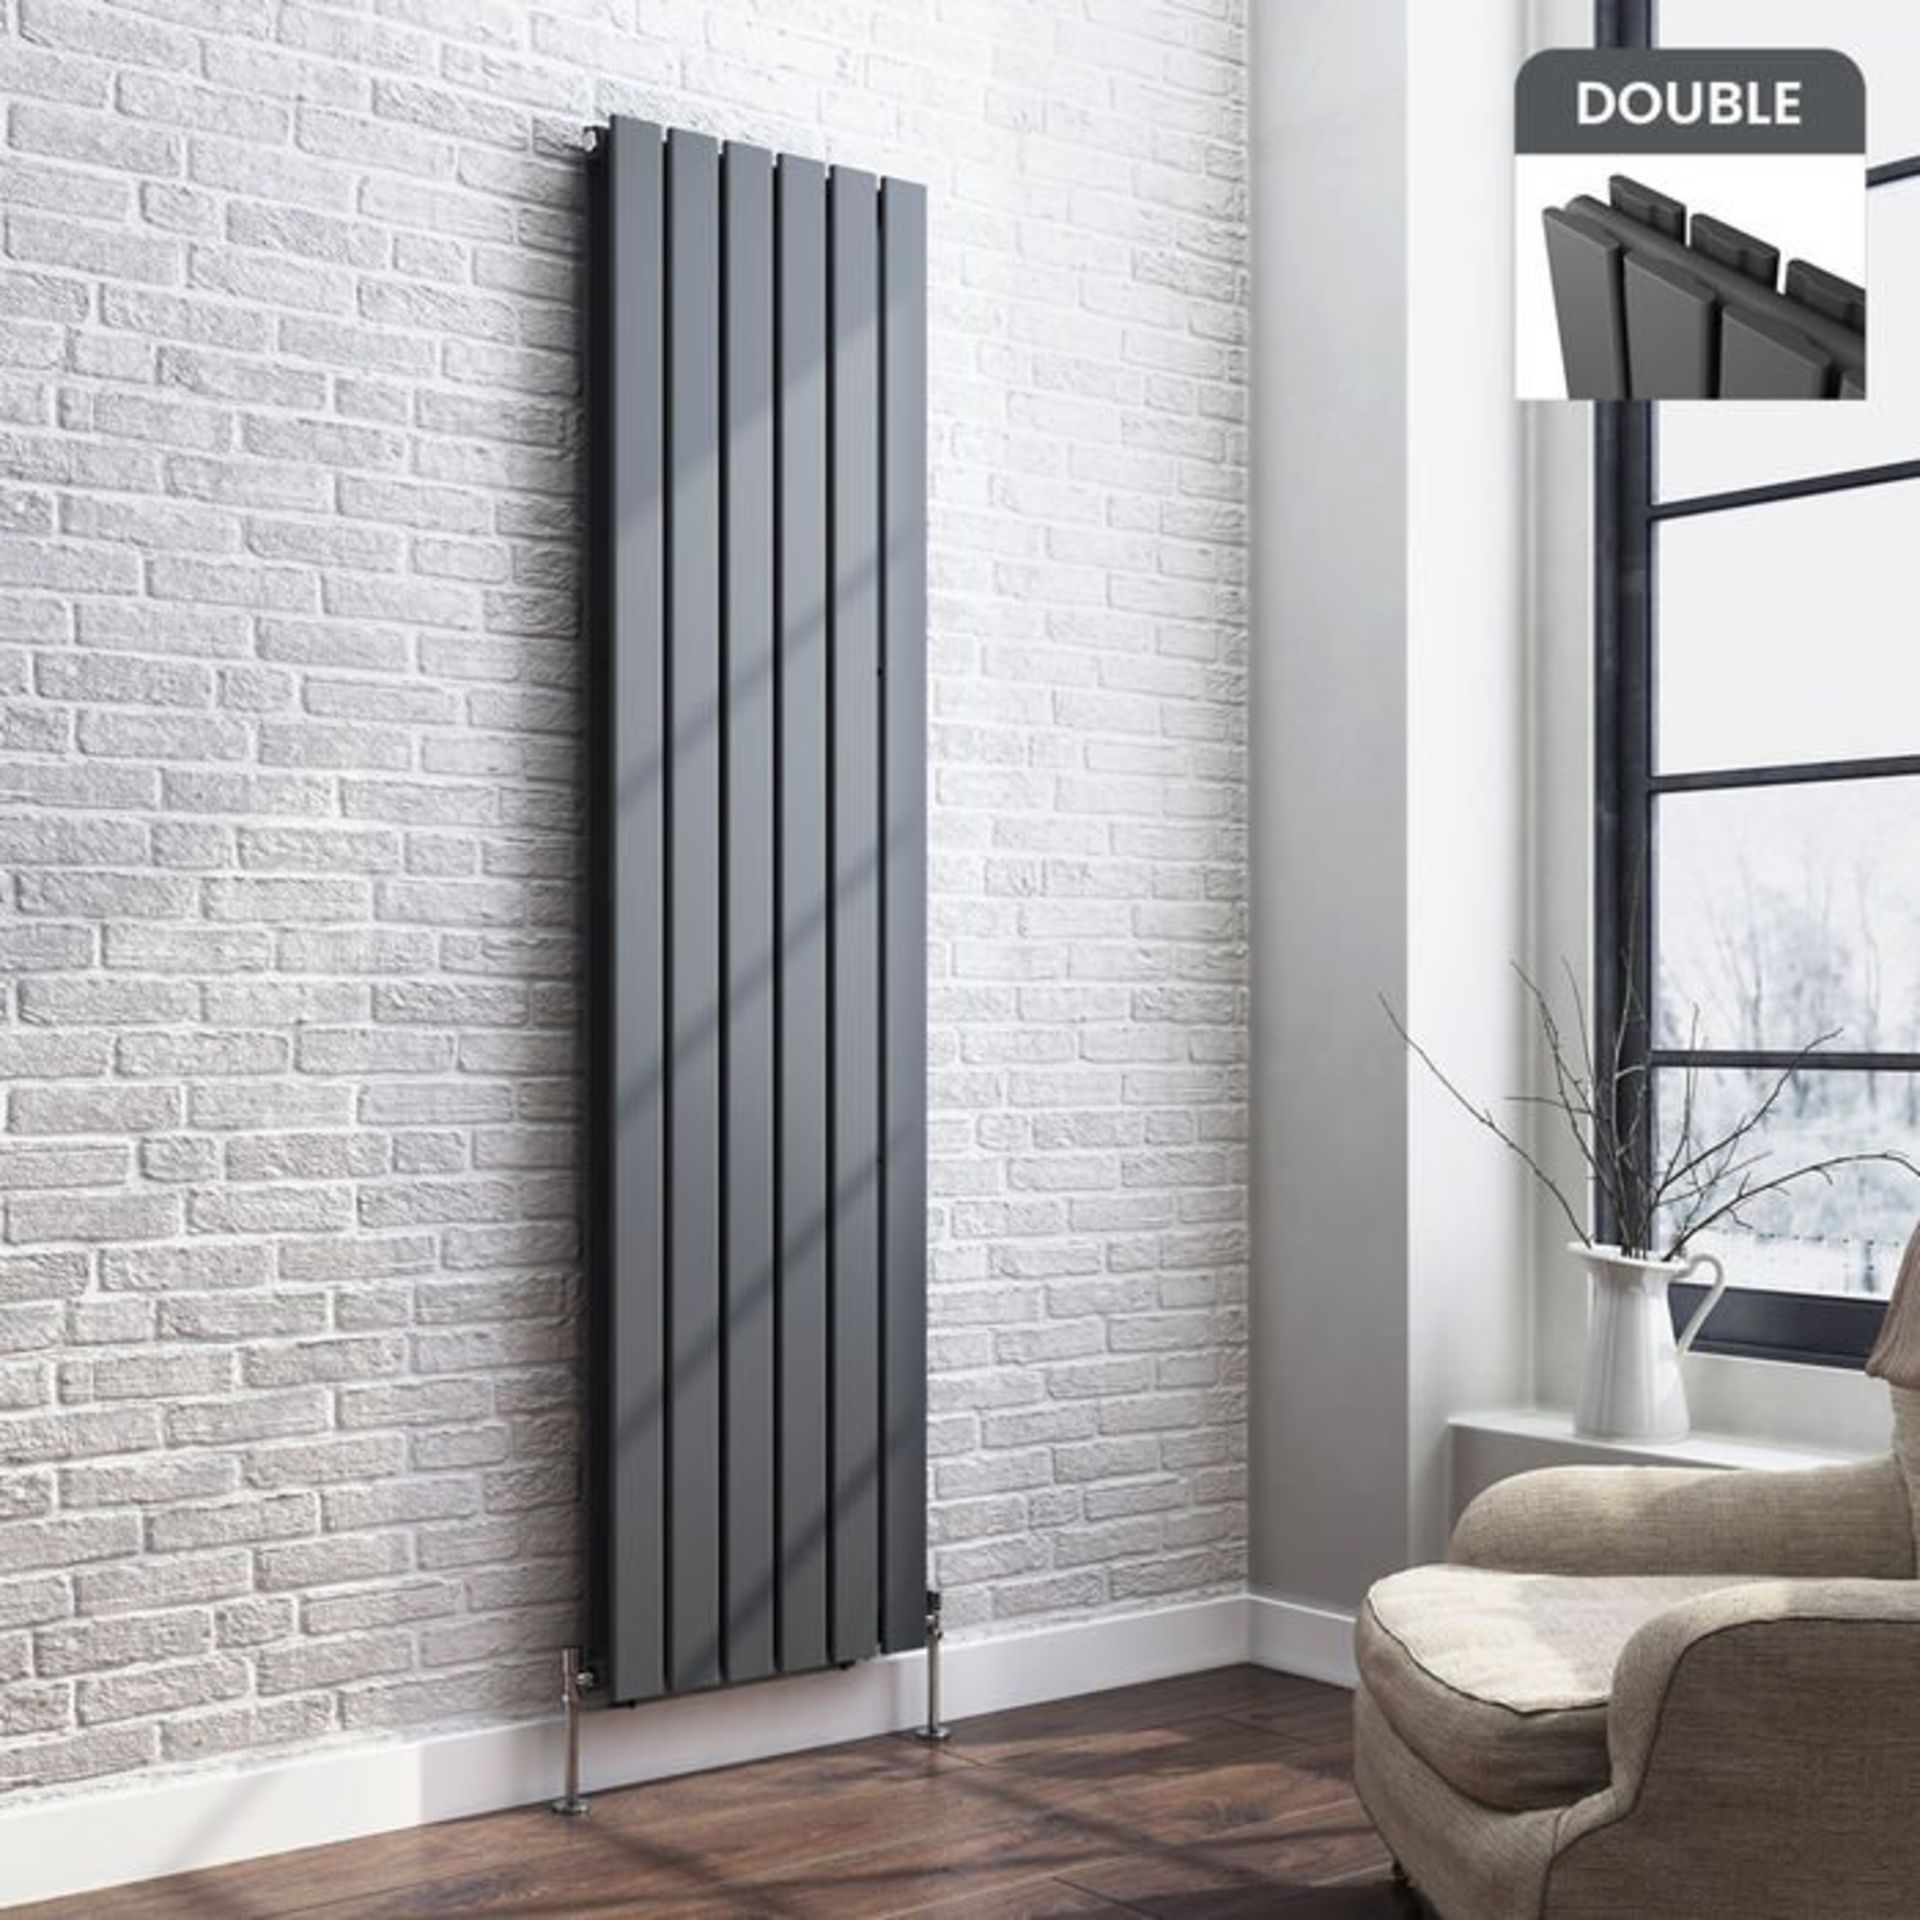 (S9) 1800x458mm Anthracite Double Flat Panel Vertical Radiator RRP £599.99 Made with low carbon